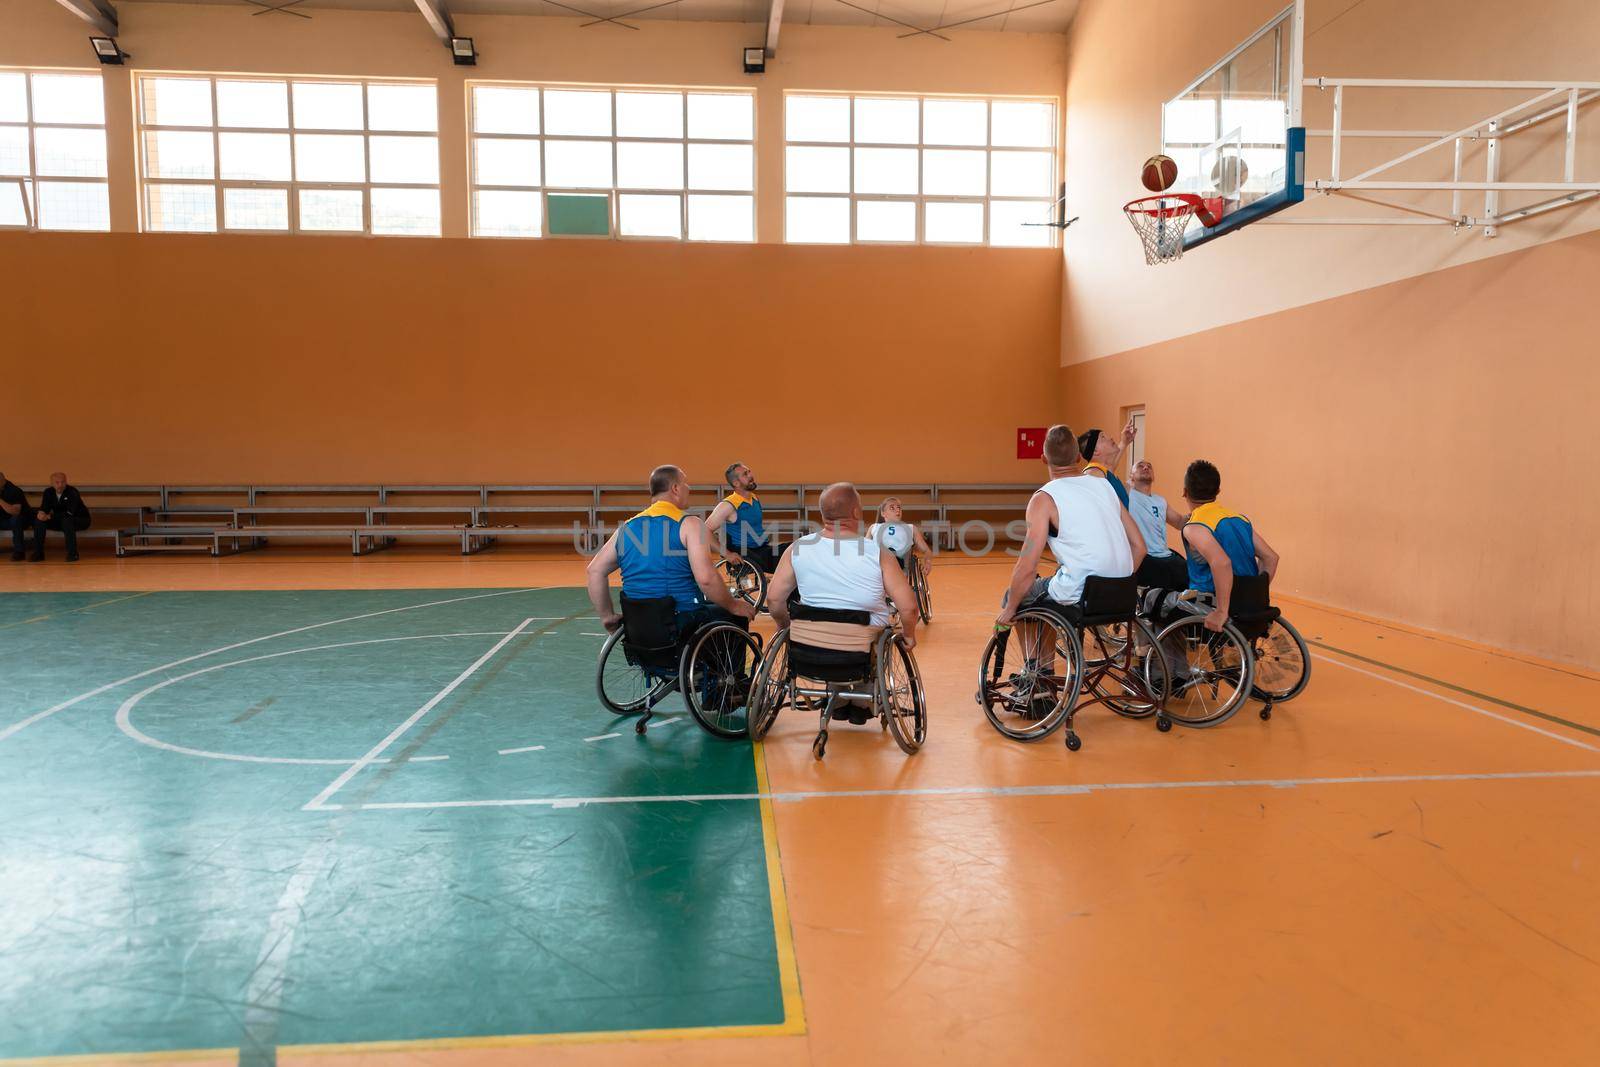 Disabled War veterans mixed race and age basketball teams in wheelchairs playing a training match in a sports gym hall. Handicapped people rehabilitation and inclusion concept by dotshock